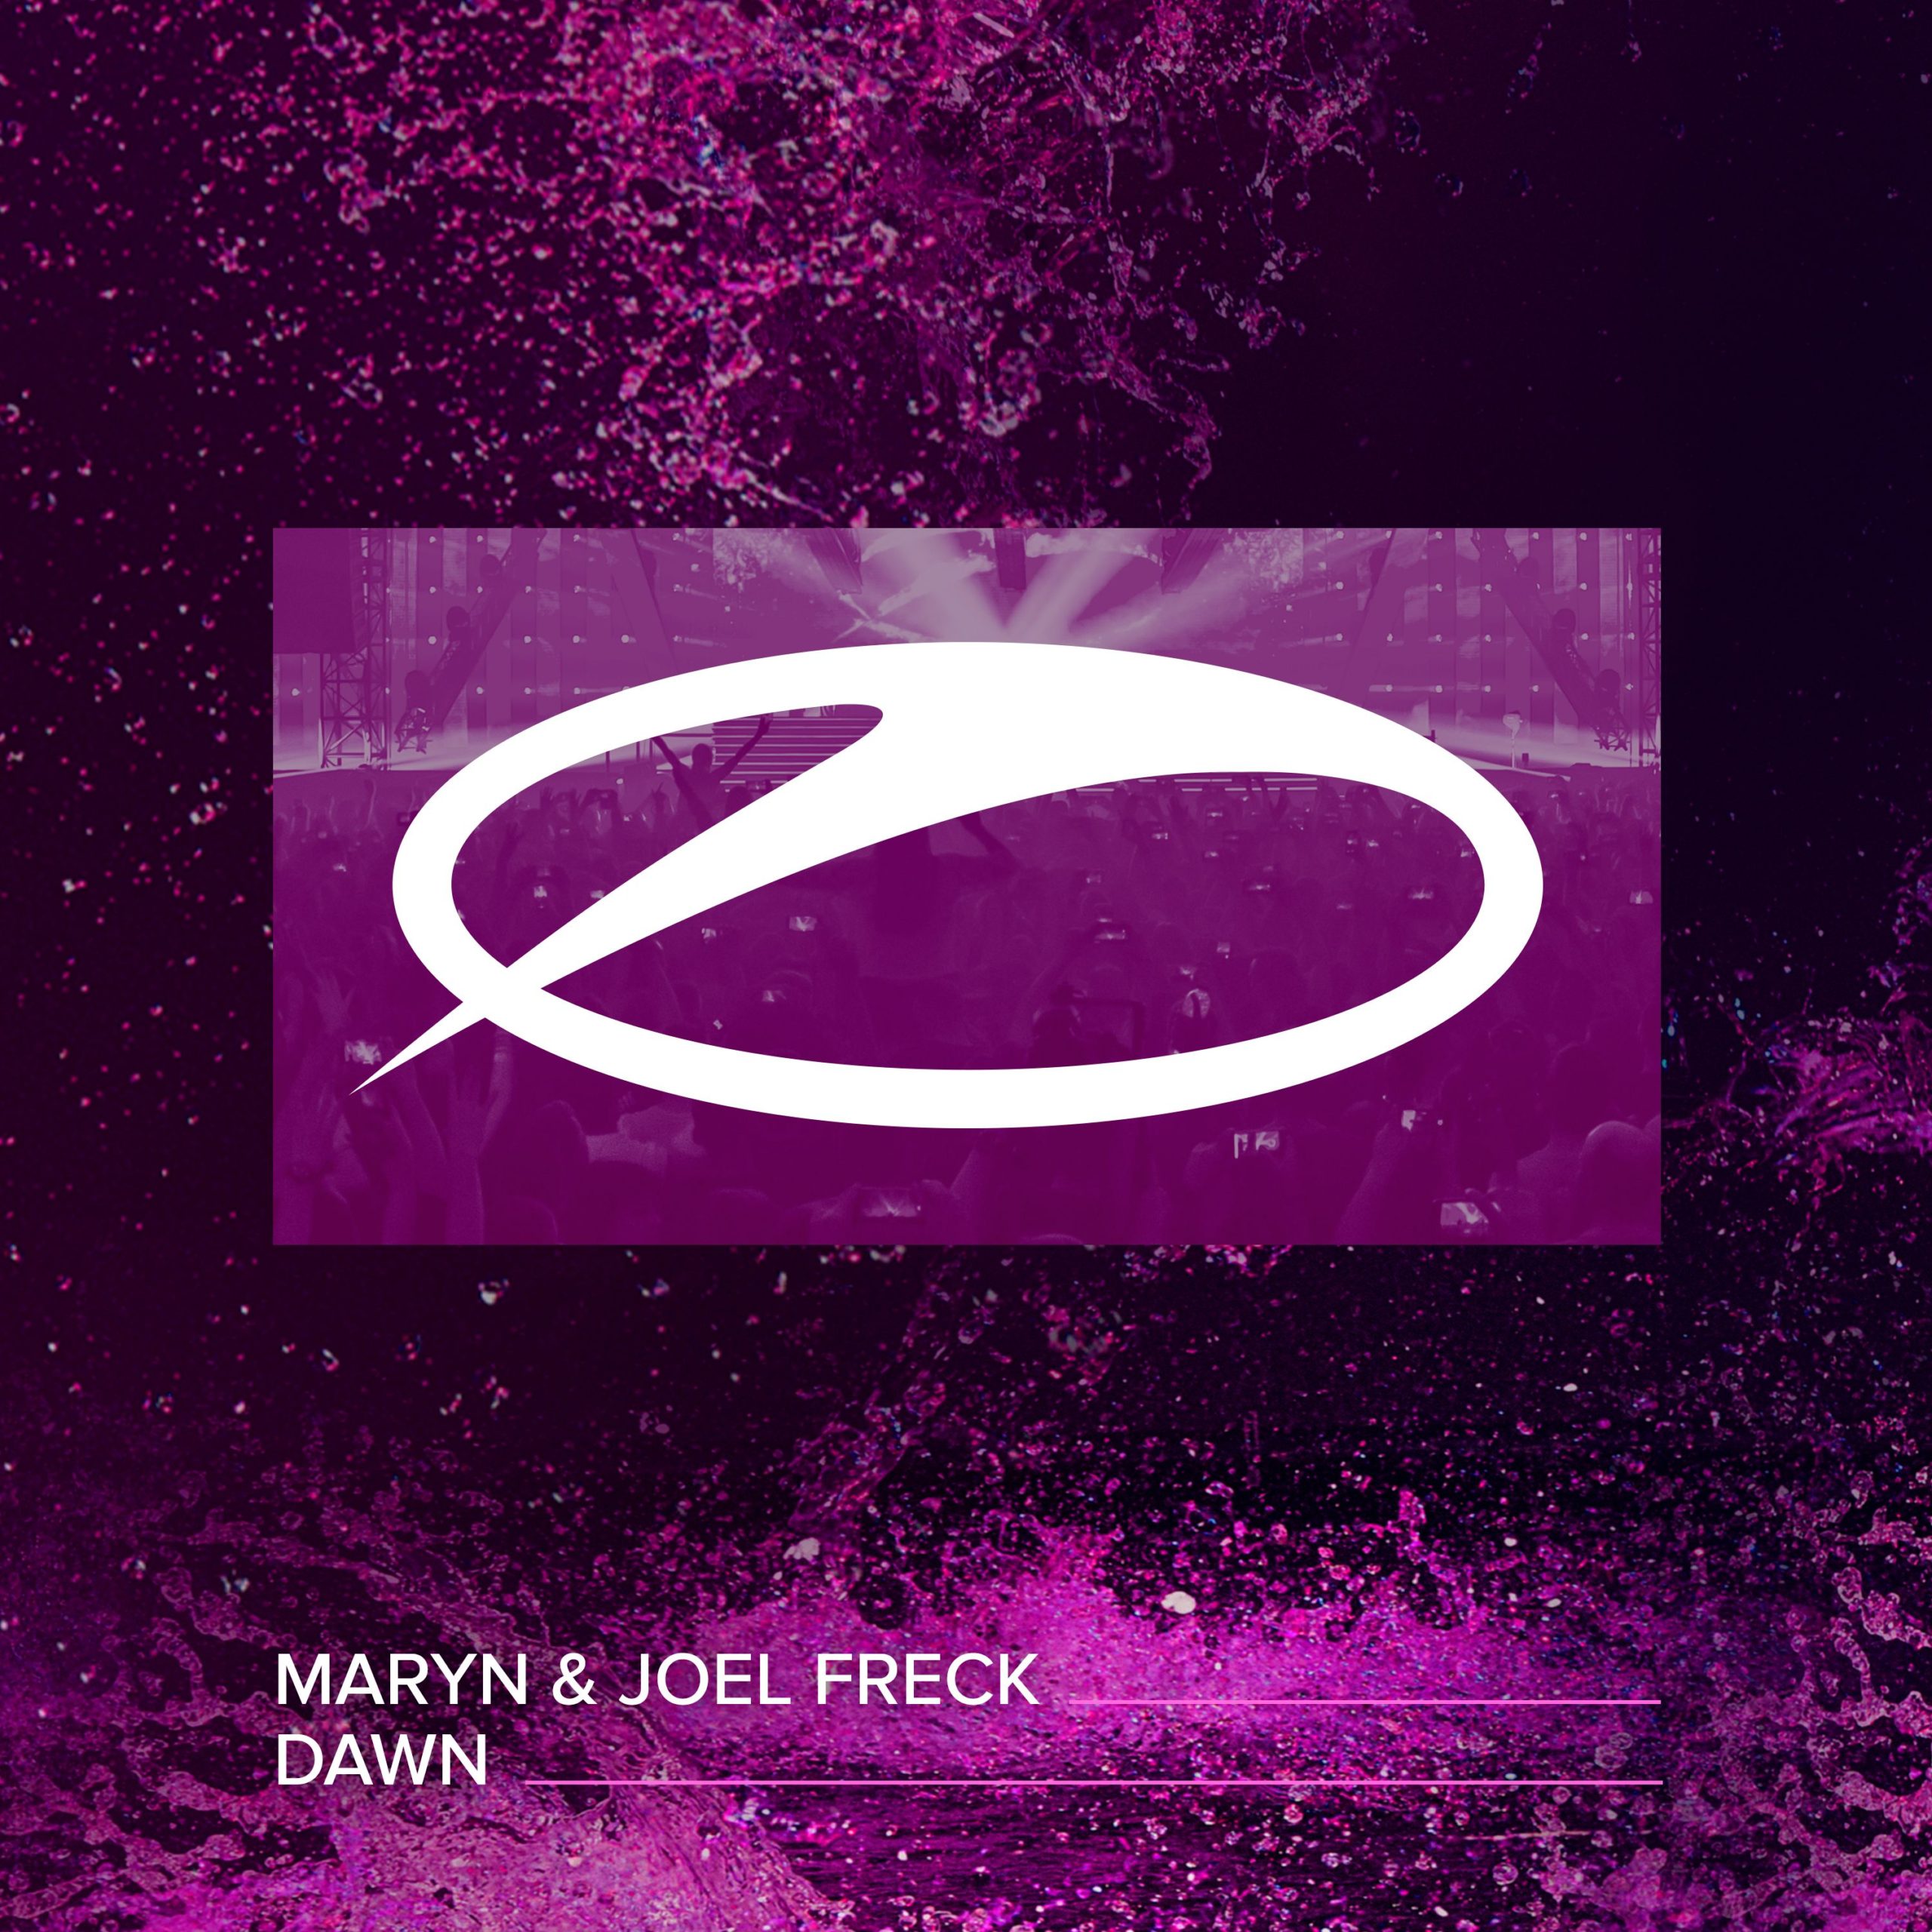 Maryn and Joel Freck presents Dawn on A State Of Trance